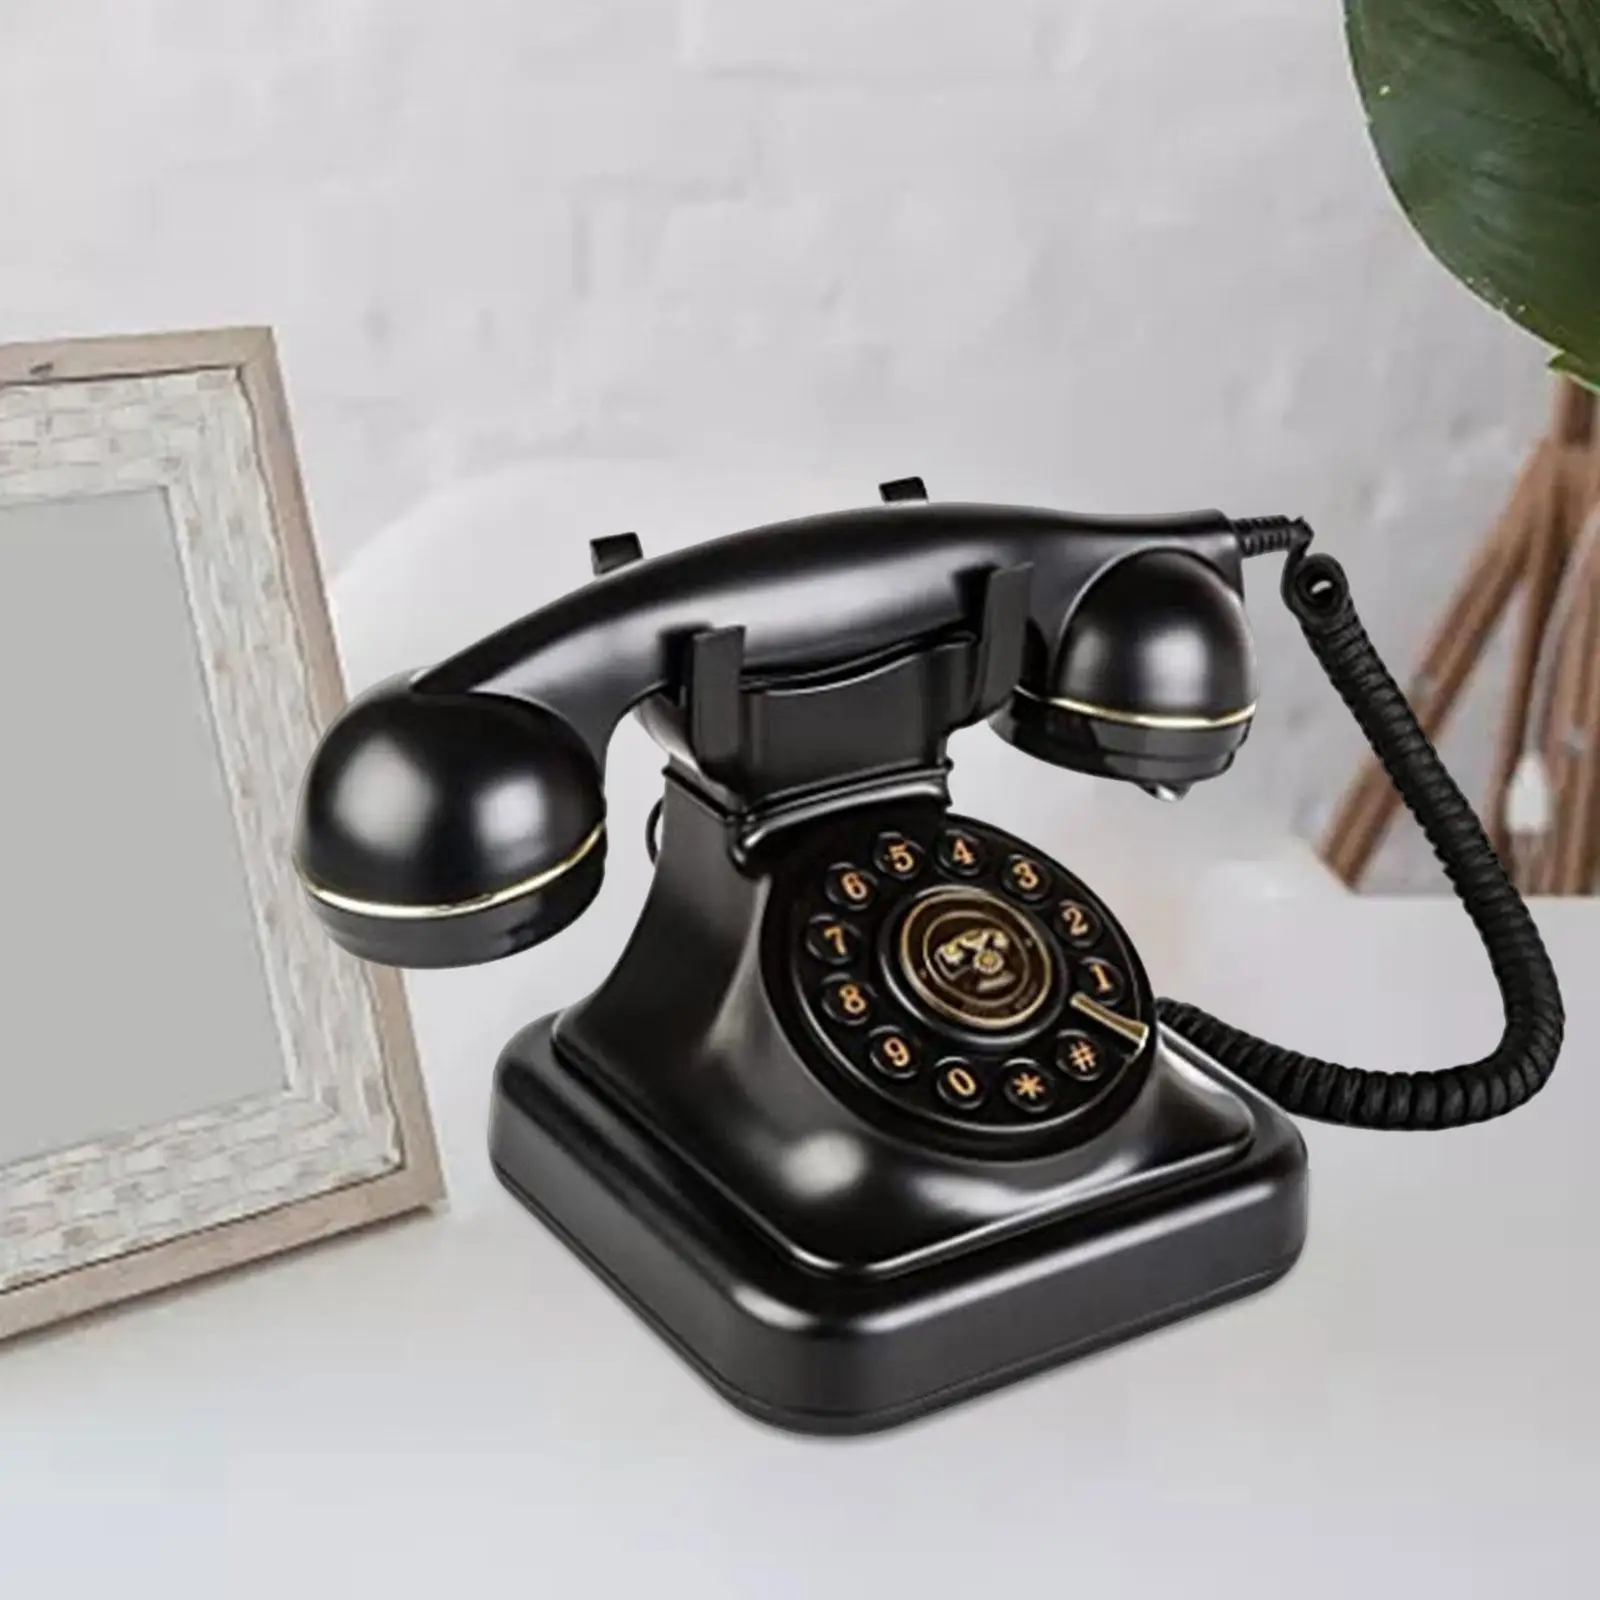 Corded Retro Telephone Landline Phones Old Fashion with Mechanical Bell Push Button Dial for Desk